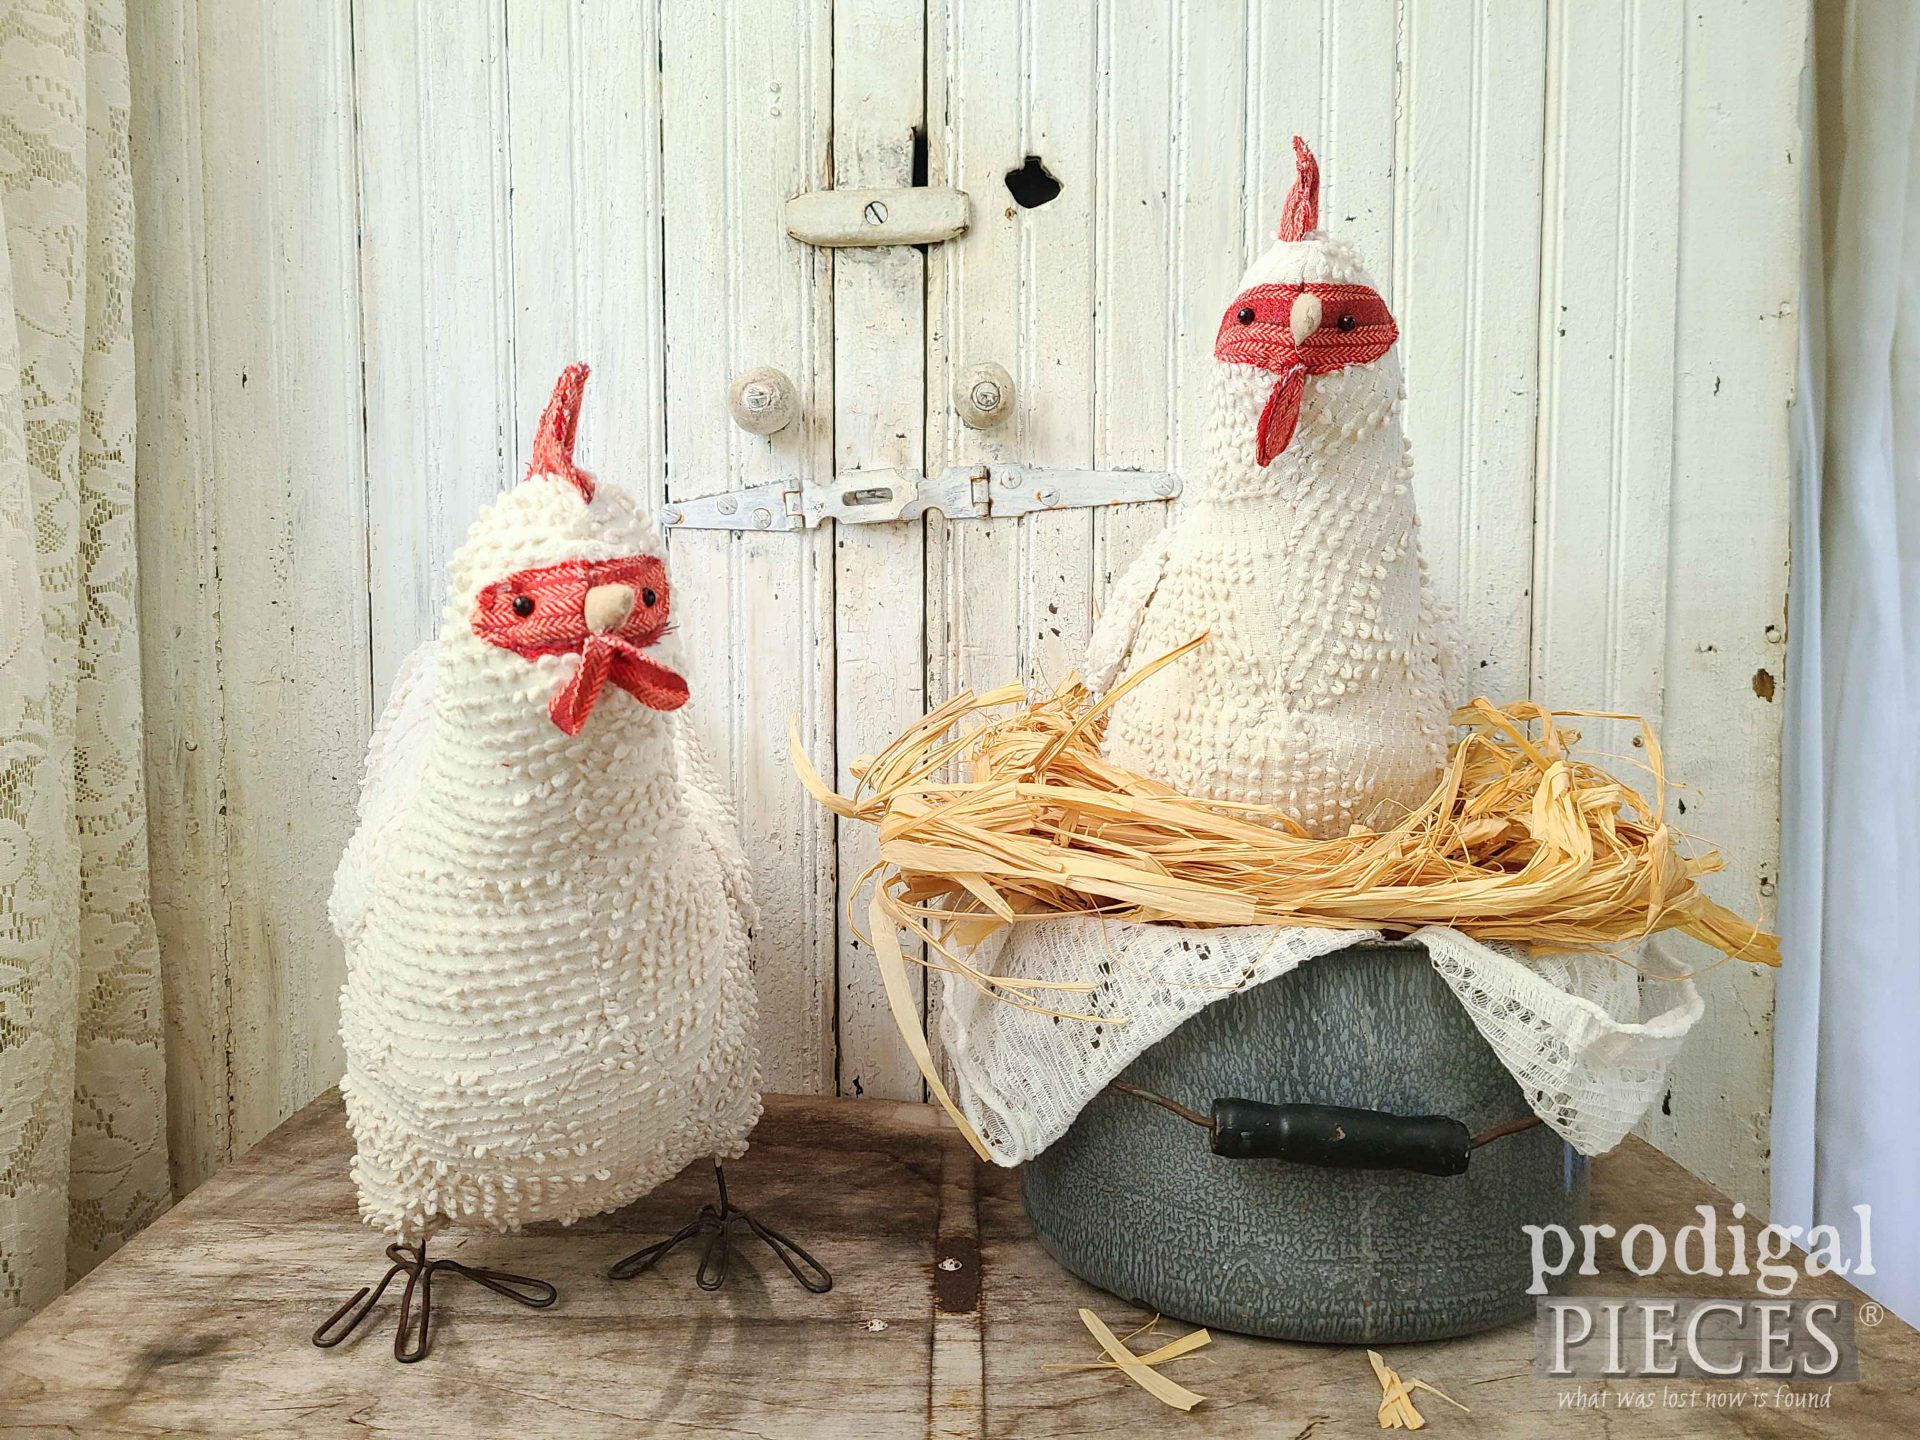 Absolutely Adorable Life-Size Chicken Refashioned from an Upcycled Chenille Bedspread by Larissa of Prodigal Pieces | prodigalpieces.com #prodigalpieces #farmhouse #chicken #art #handmade